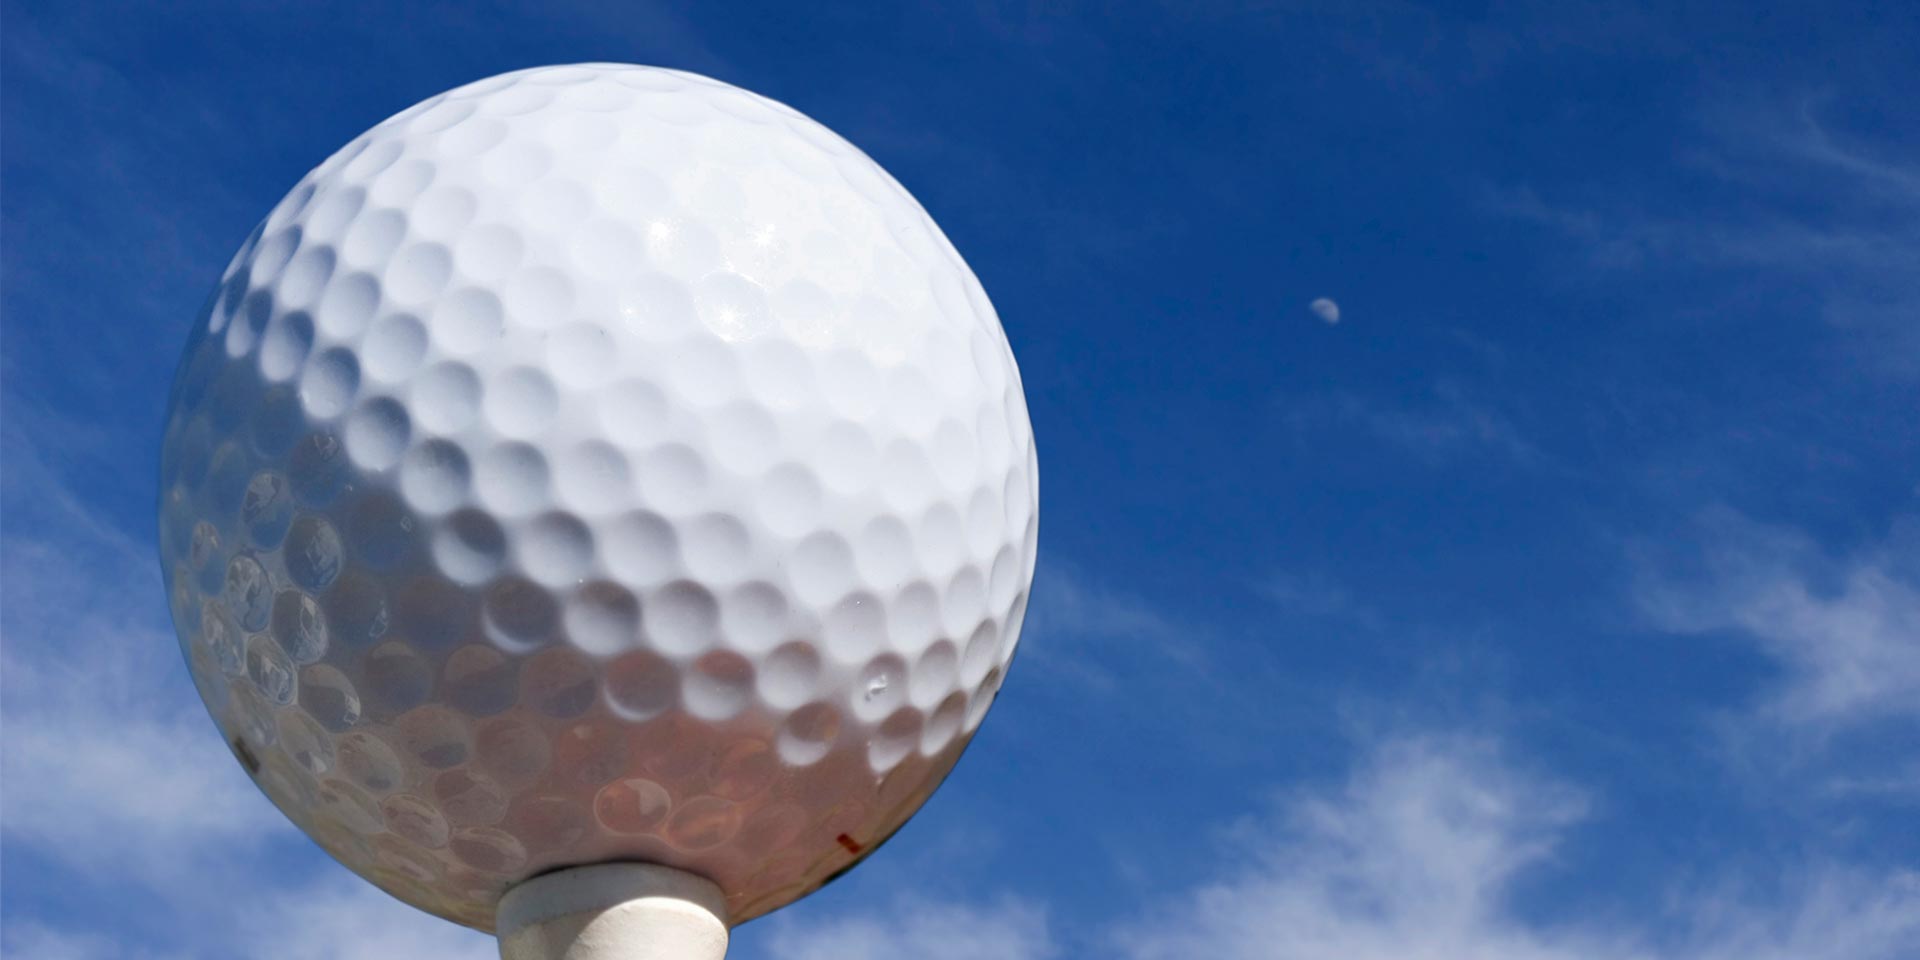 Learn about the future of golf on our blog!